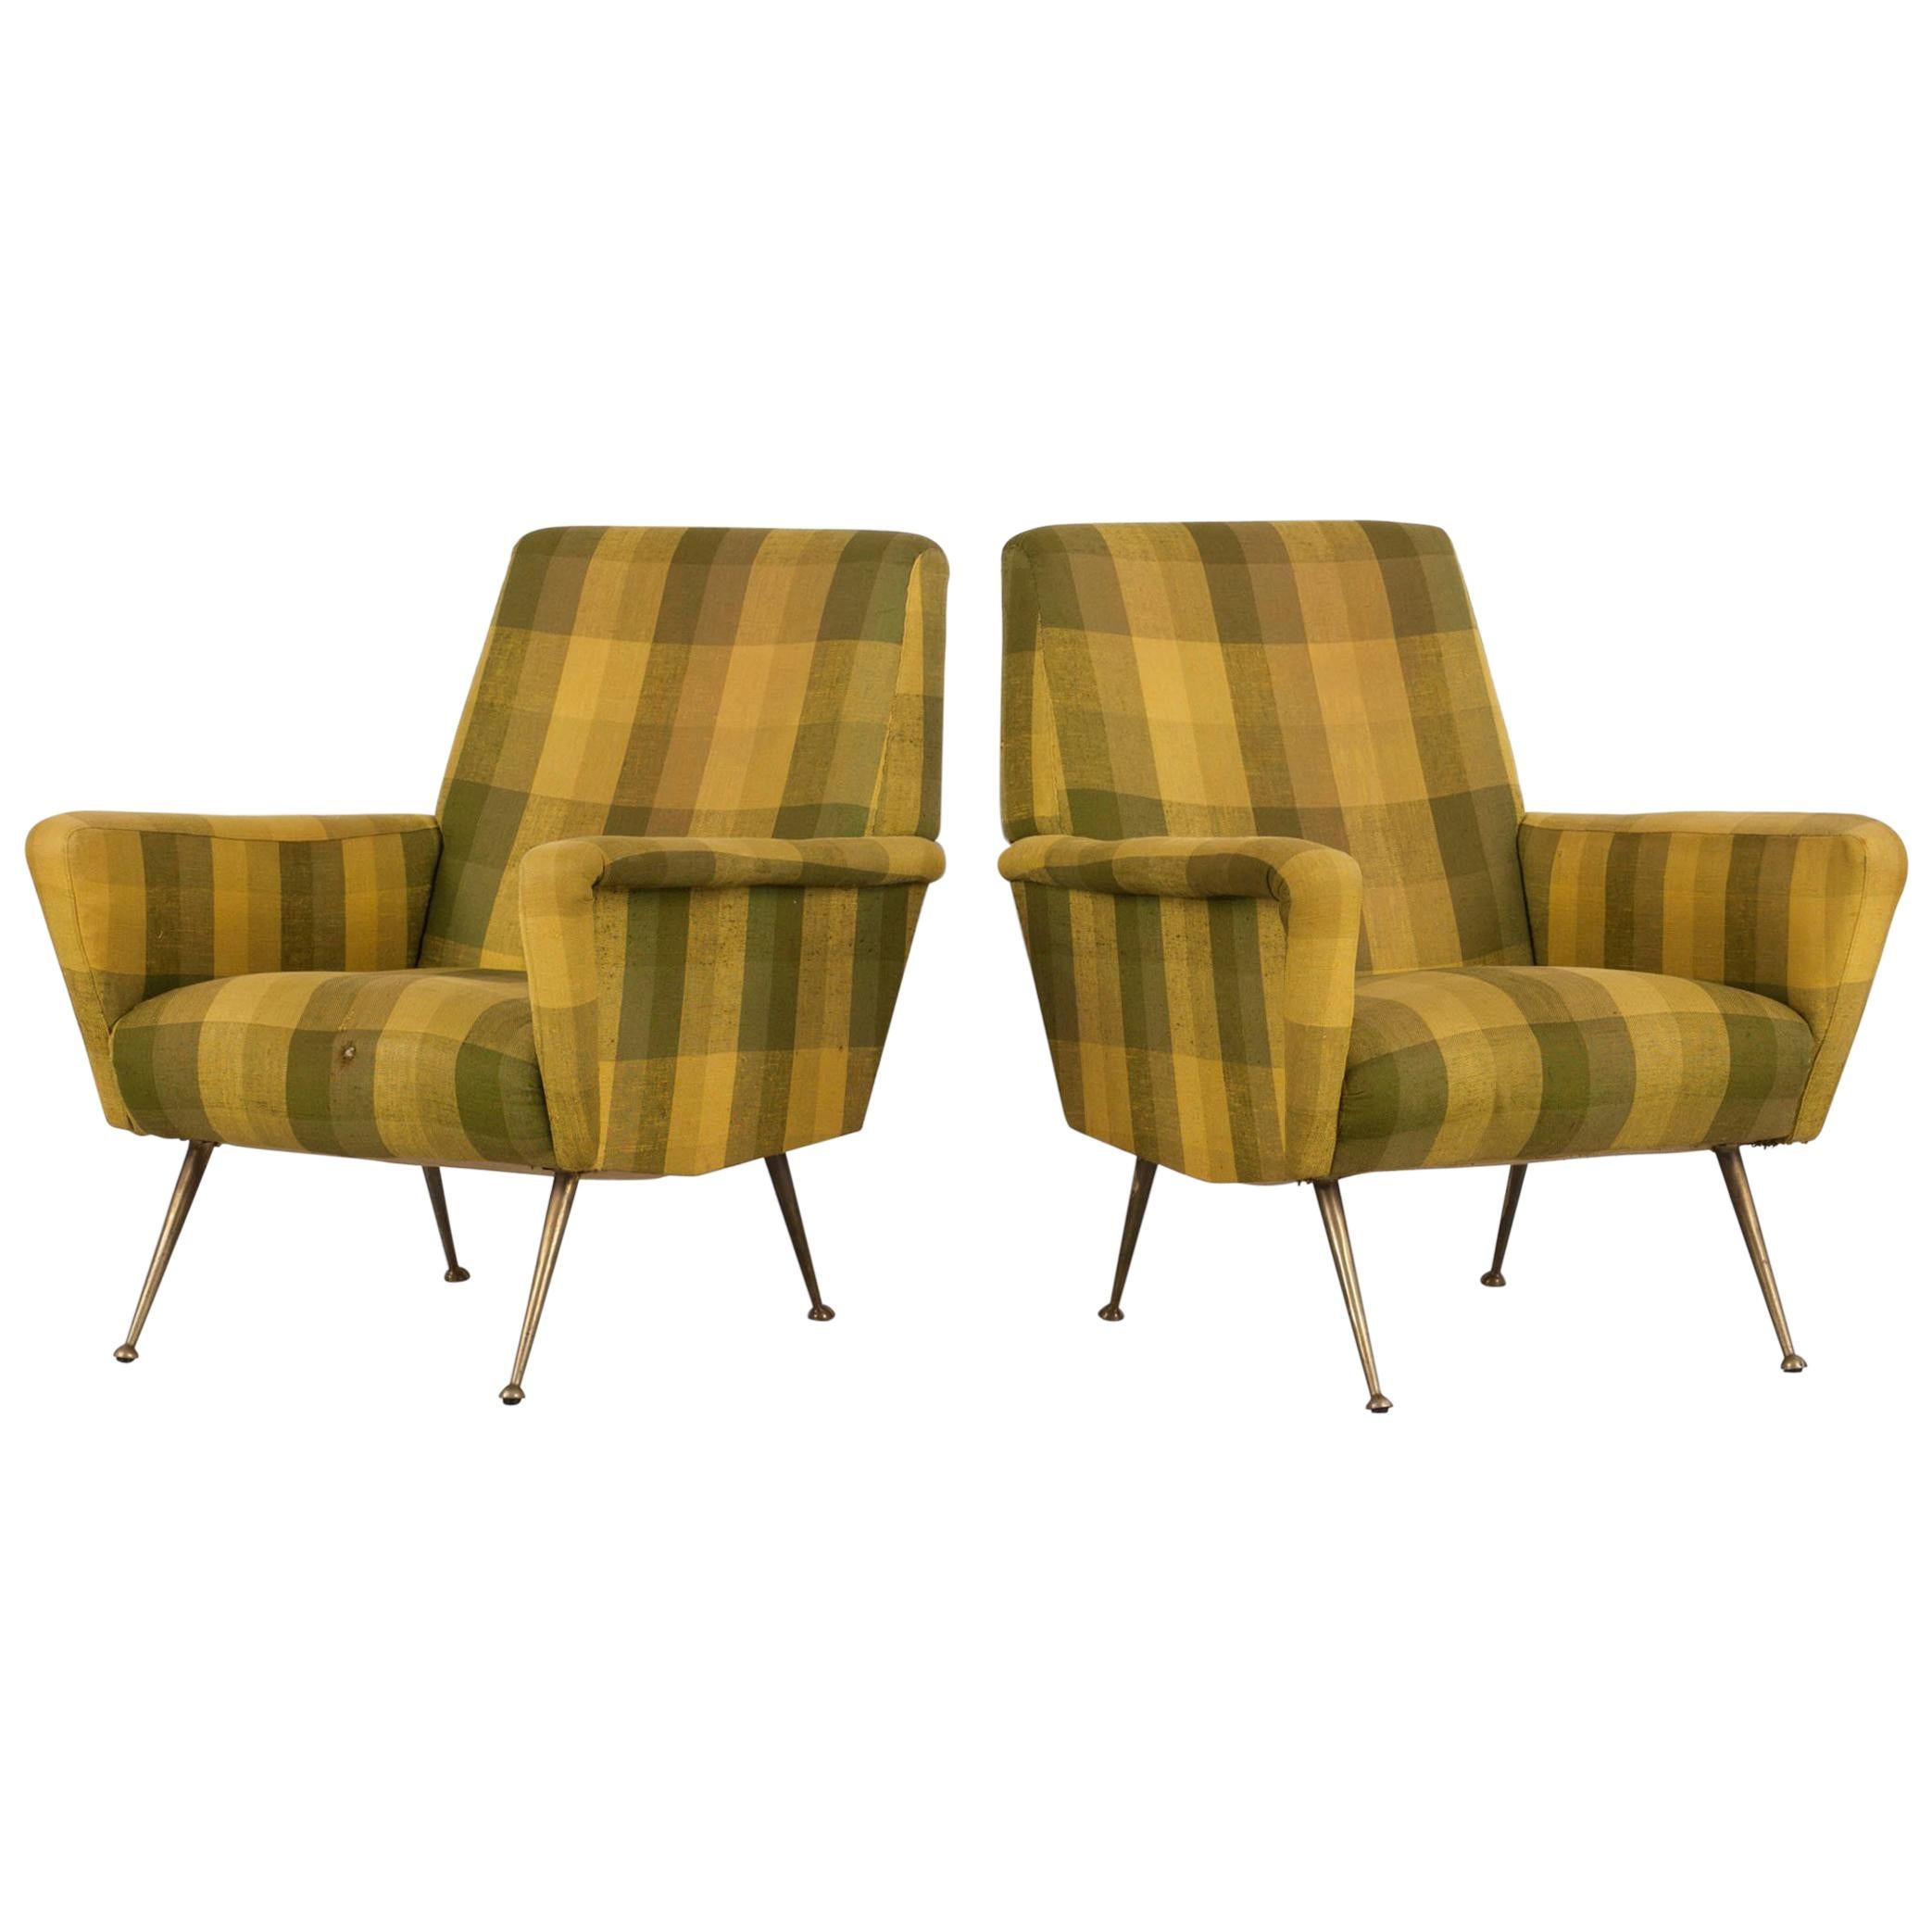 Set of Two Armchairs, Italy, 1950s